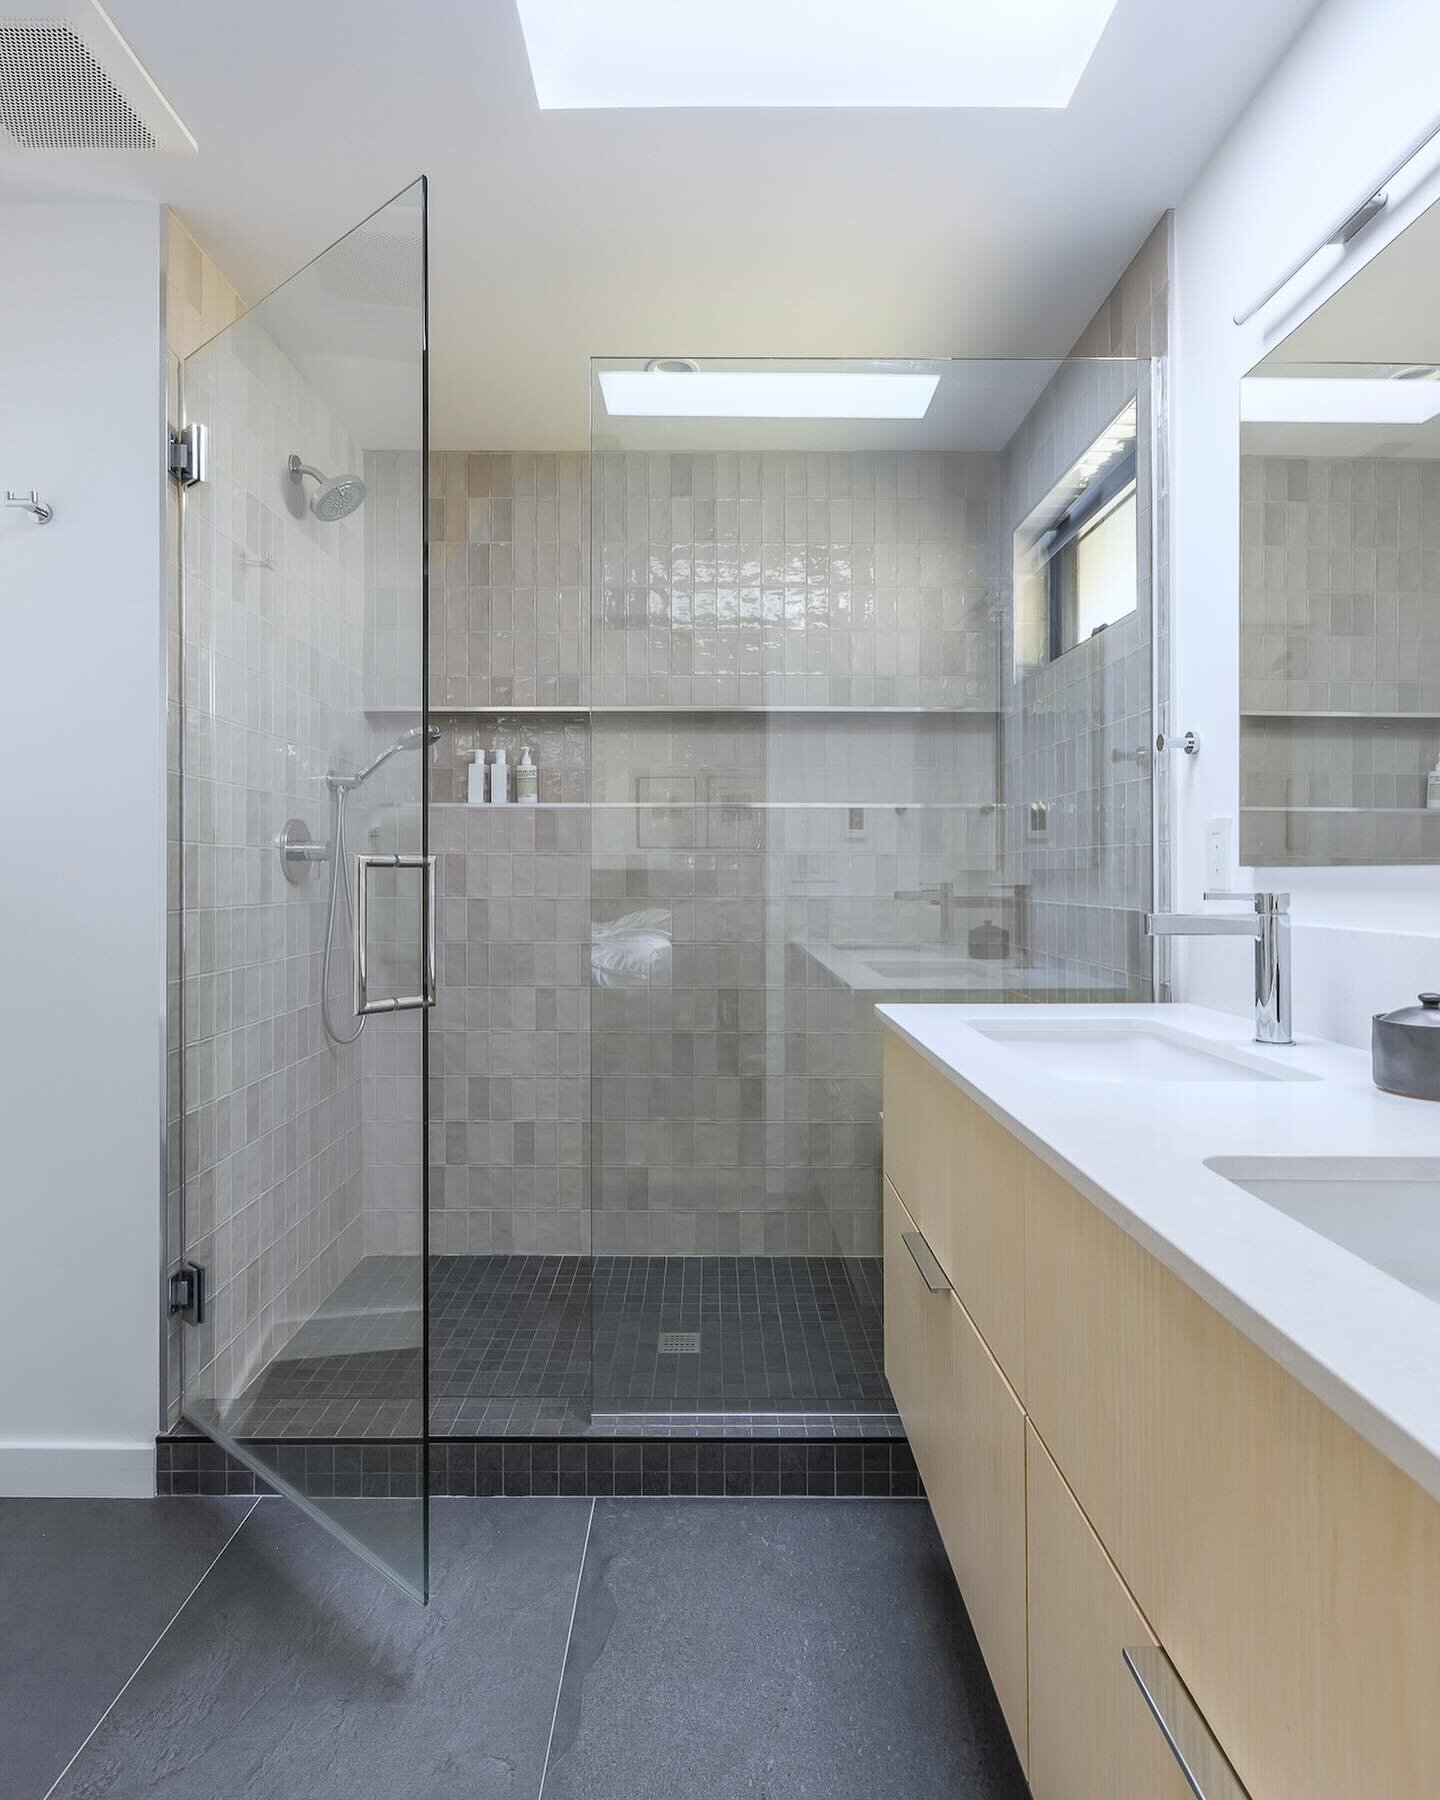 Check out this before and after of the primary bathroom at our South Boulder project! The goal was to create a sanctuary spa-like space within an existing bathroom location. We tore down the toilet closet wall, designed a large shower with a window f